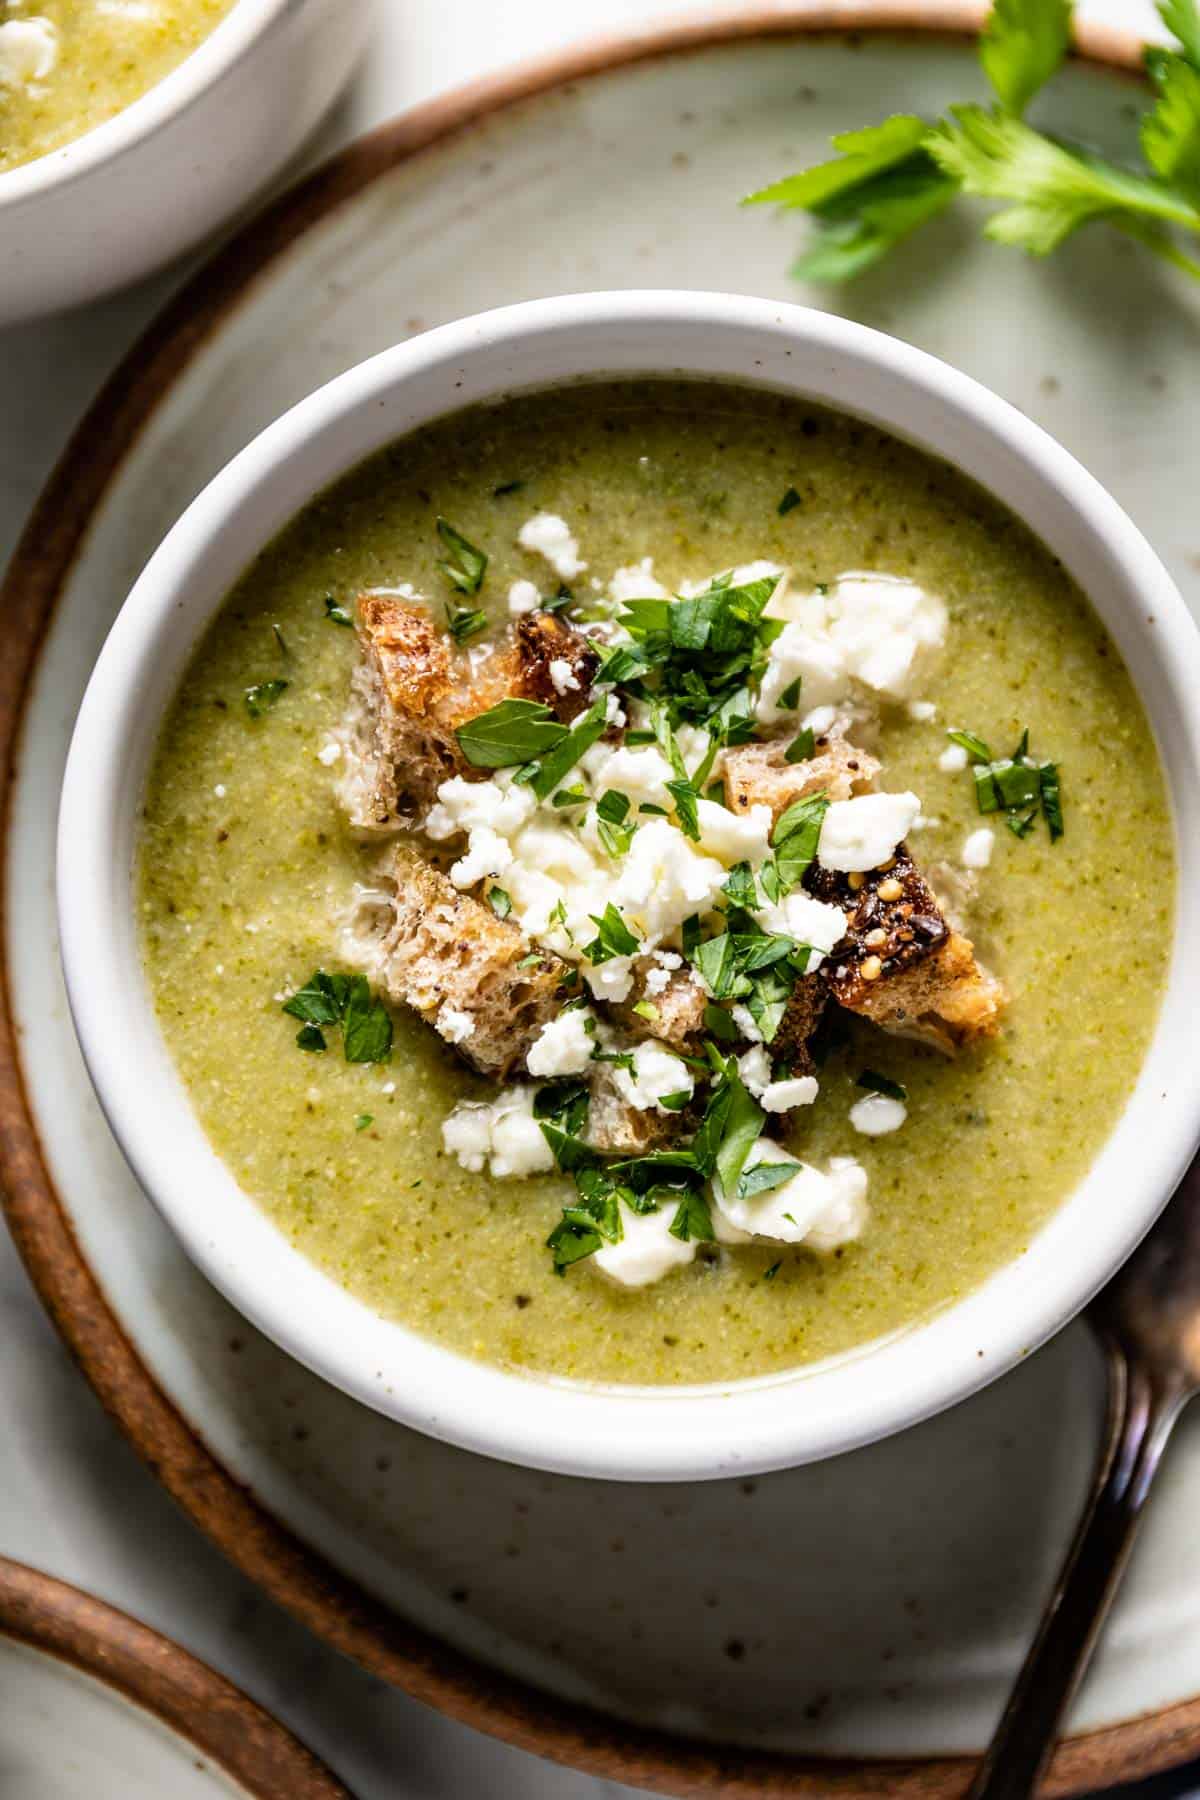 Broccoli Feta Soup in a bowl garnished with croutons.